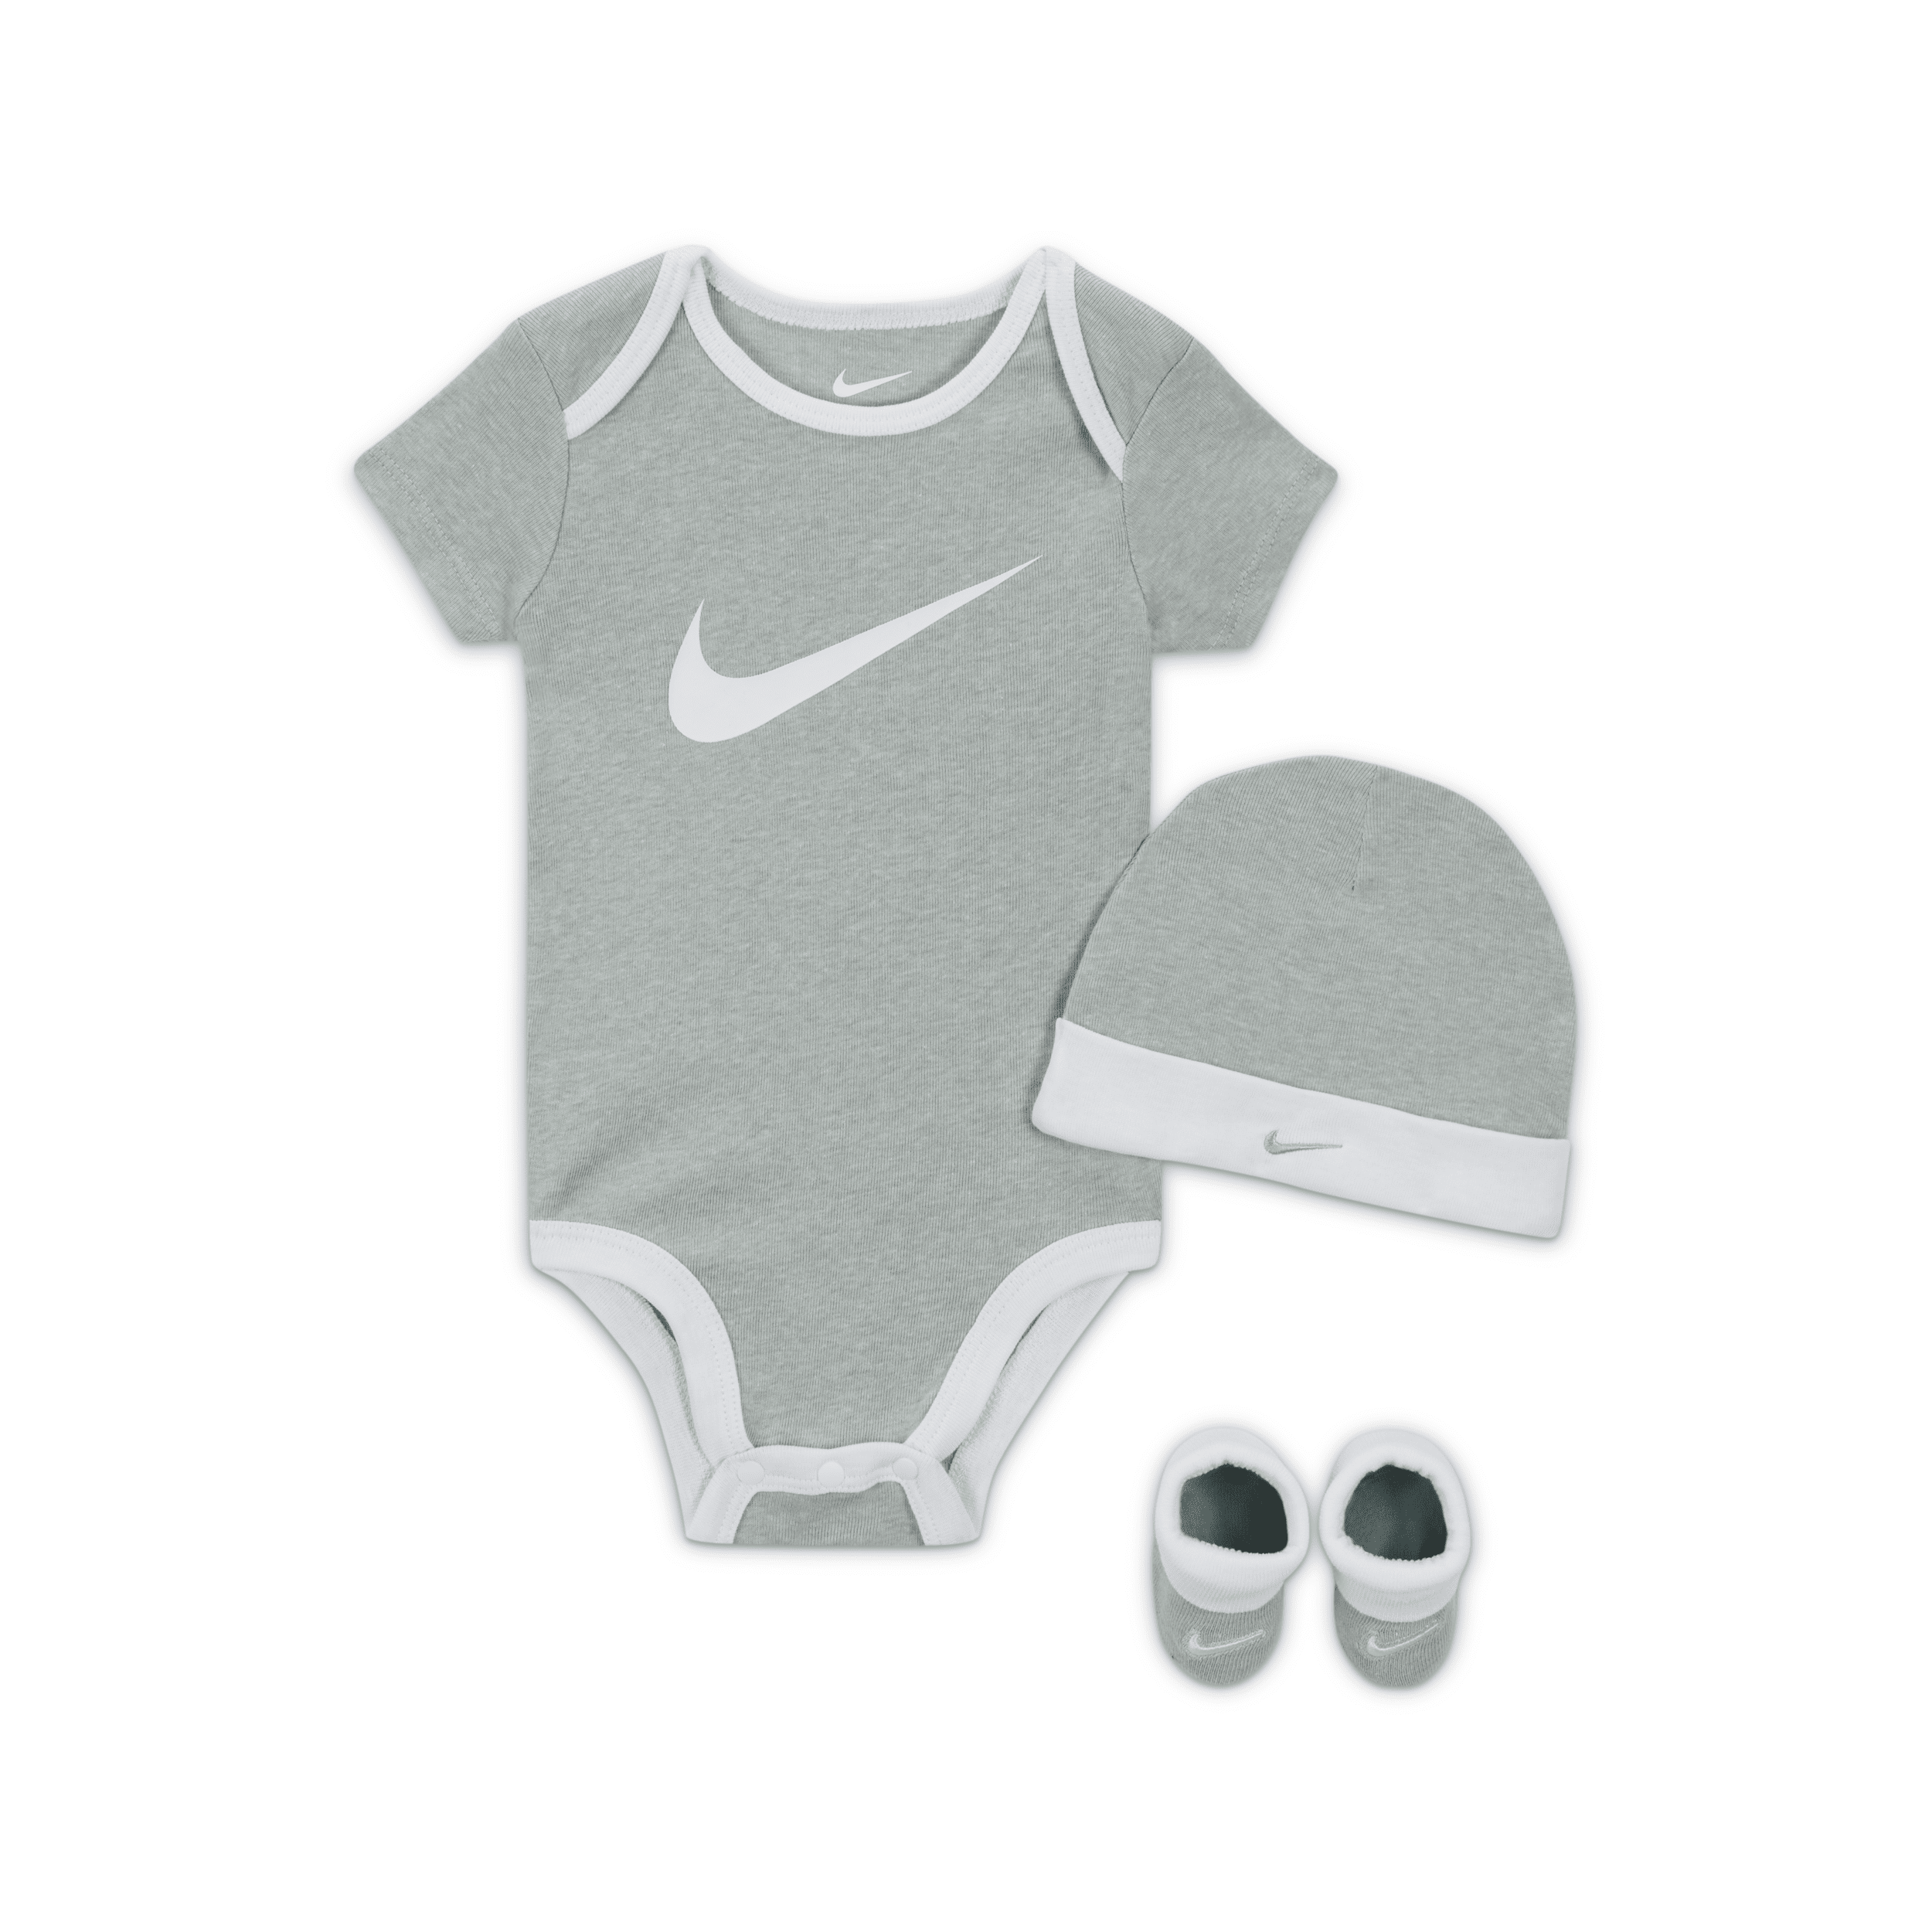 Nike Baby (0-6m) Bodysuit, Hat And Booties Box Set In Grey